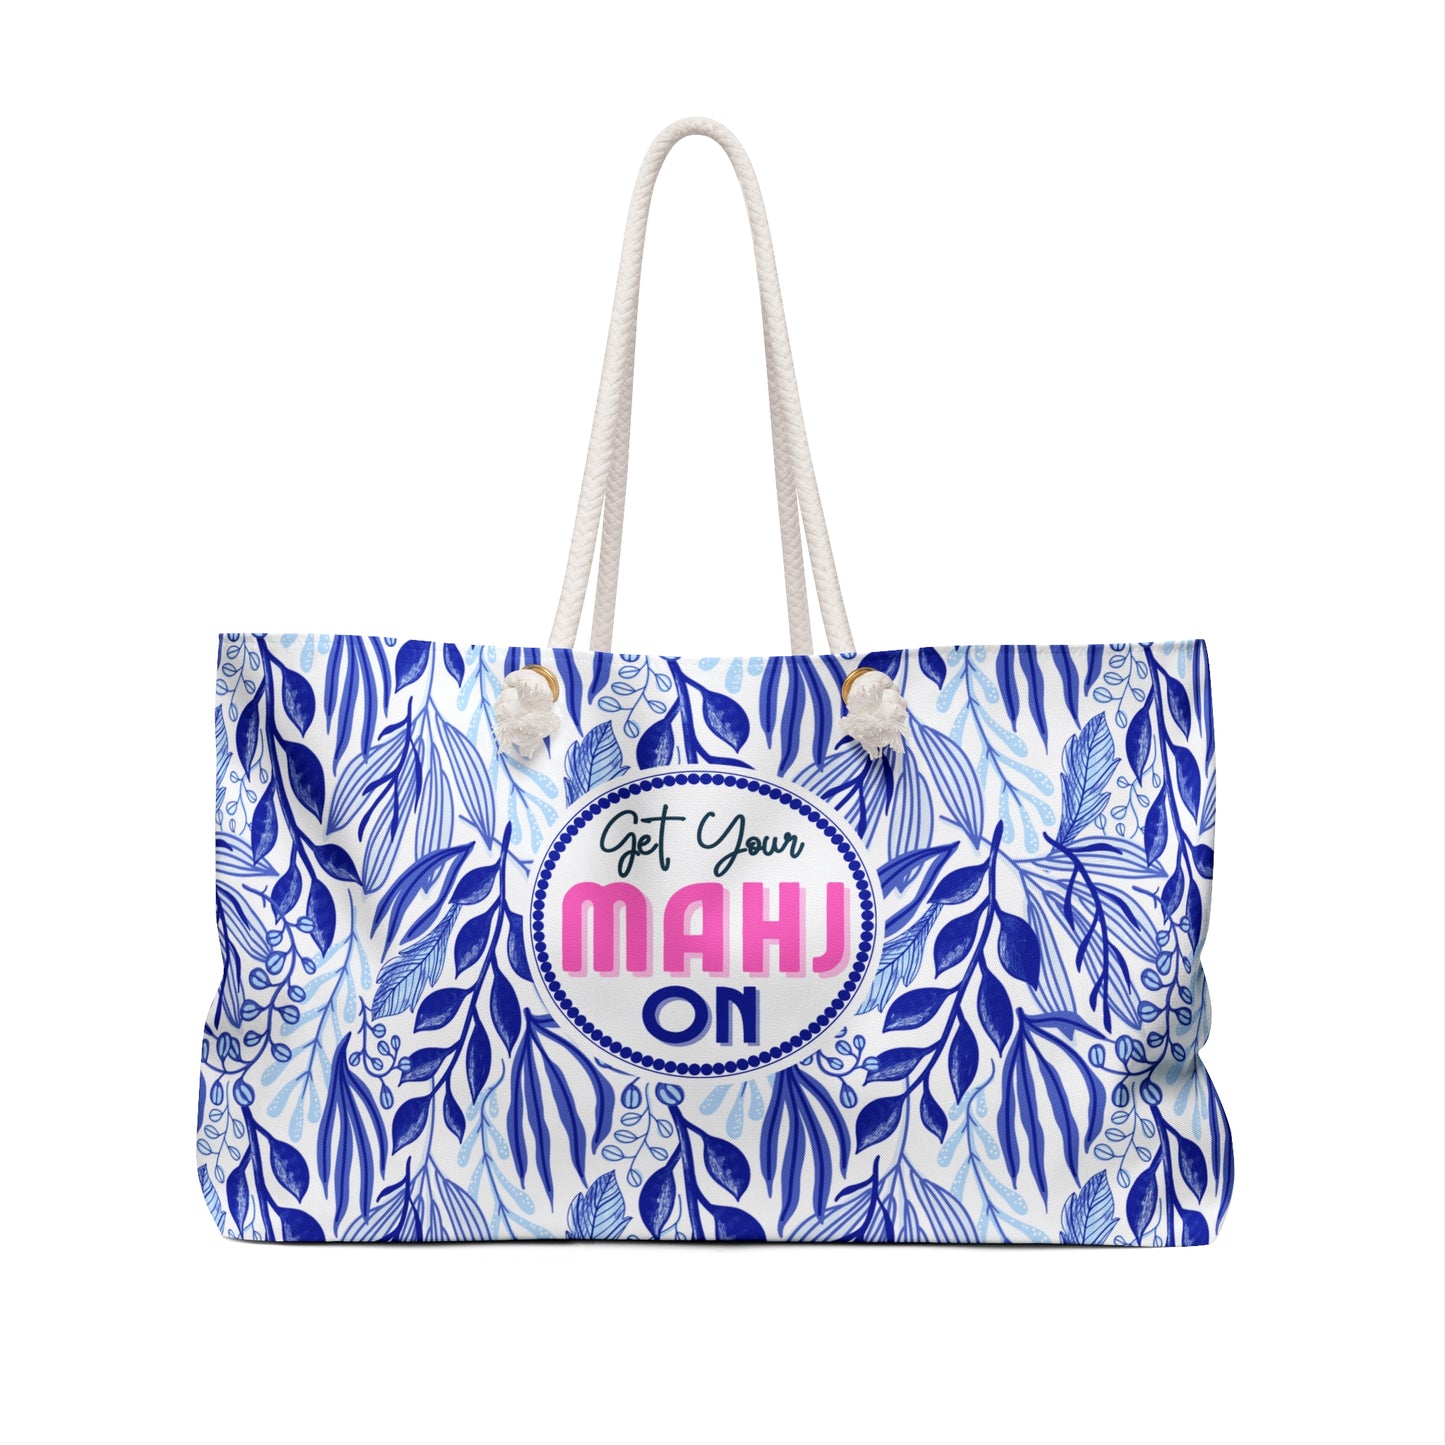 Mahjong Tote Bag. Oversize Carrying Bag to Hold Your Mahjongg Tiles, Mah Jongg Accessories and More. Blue Nature Pattern.